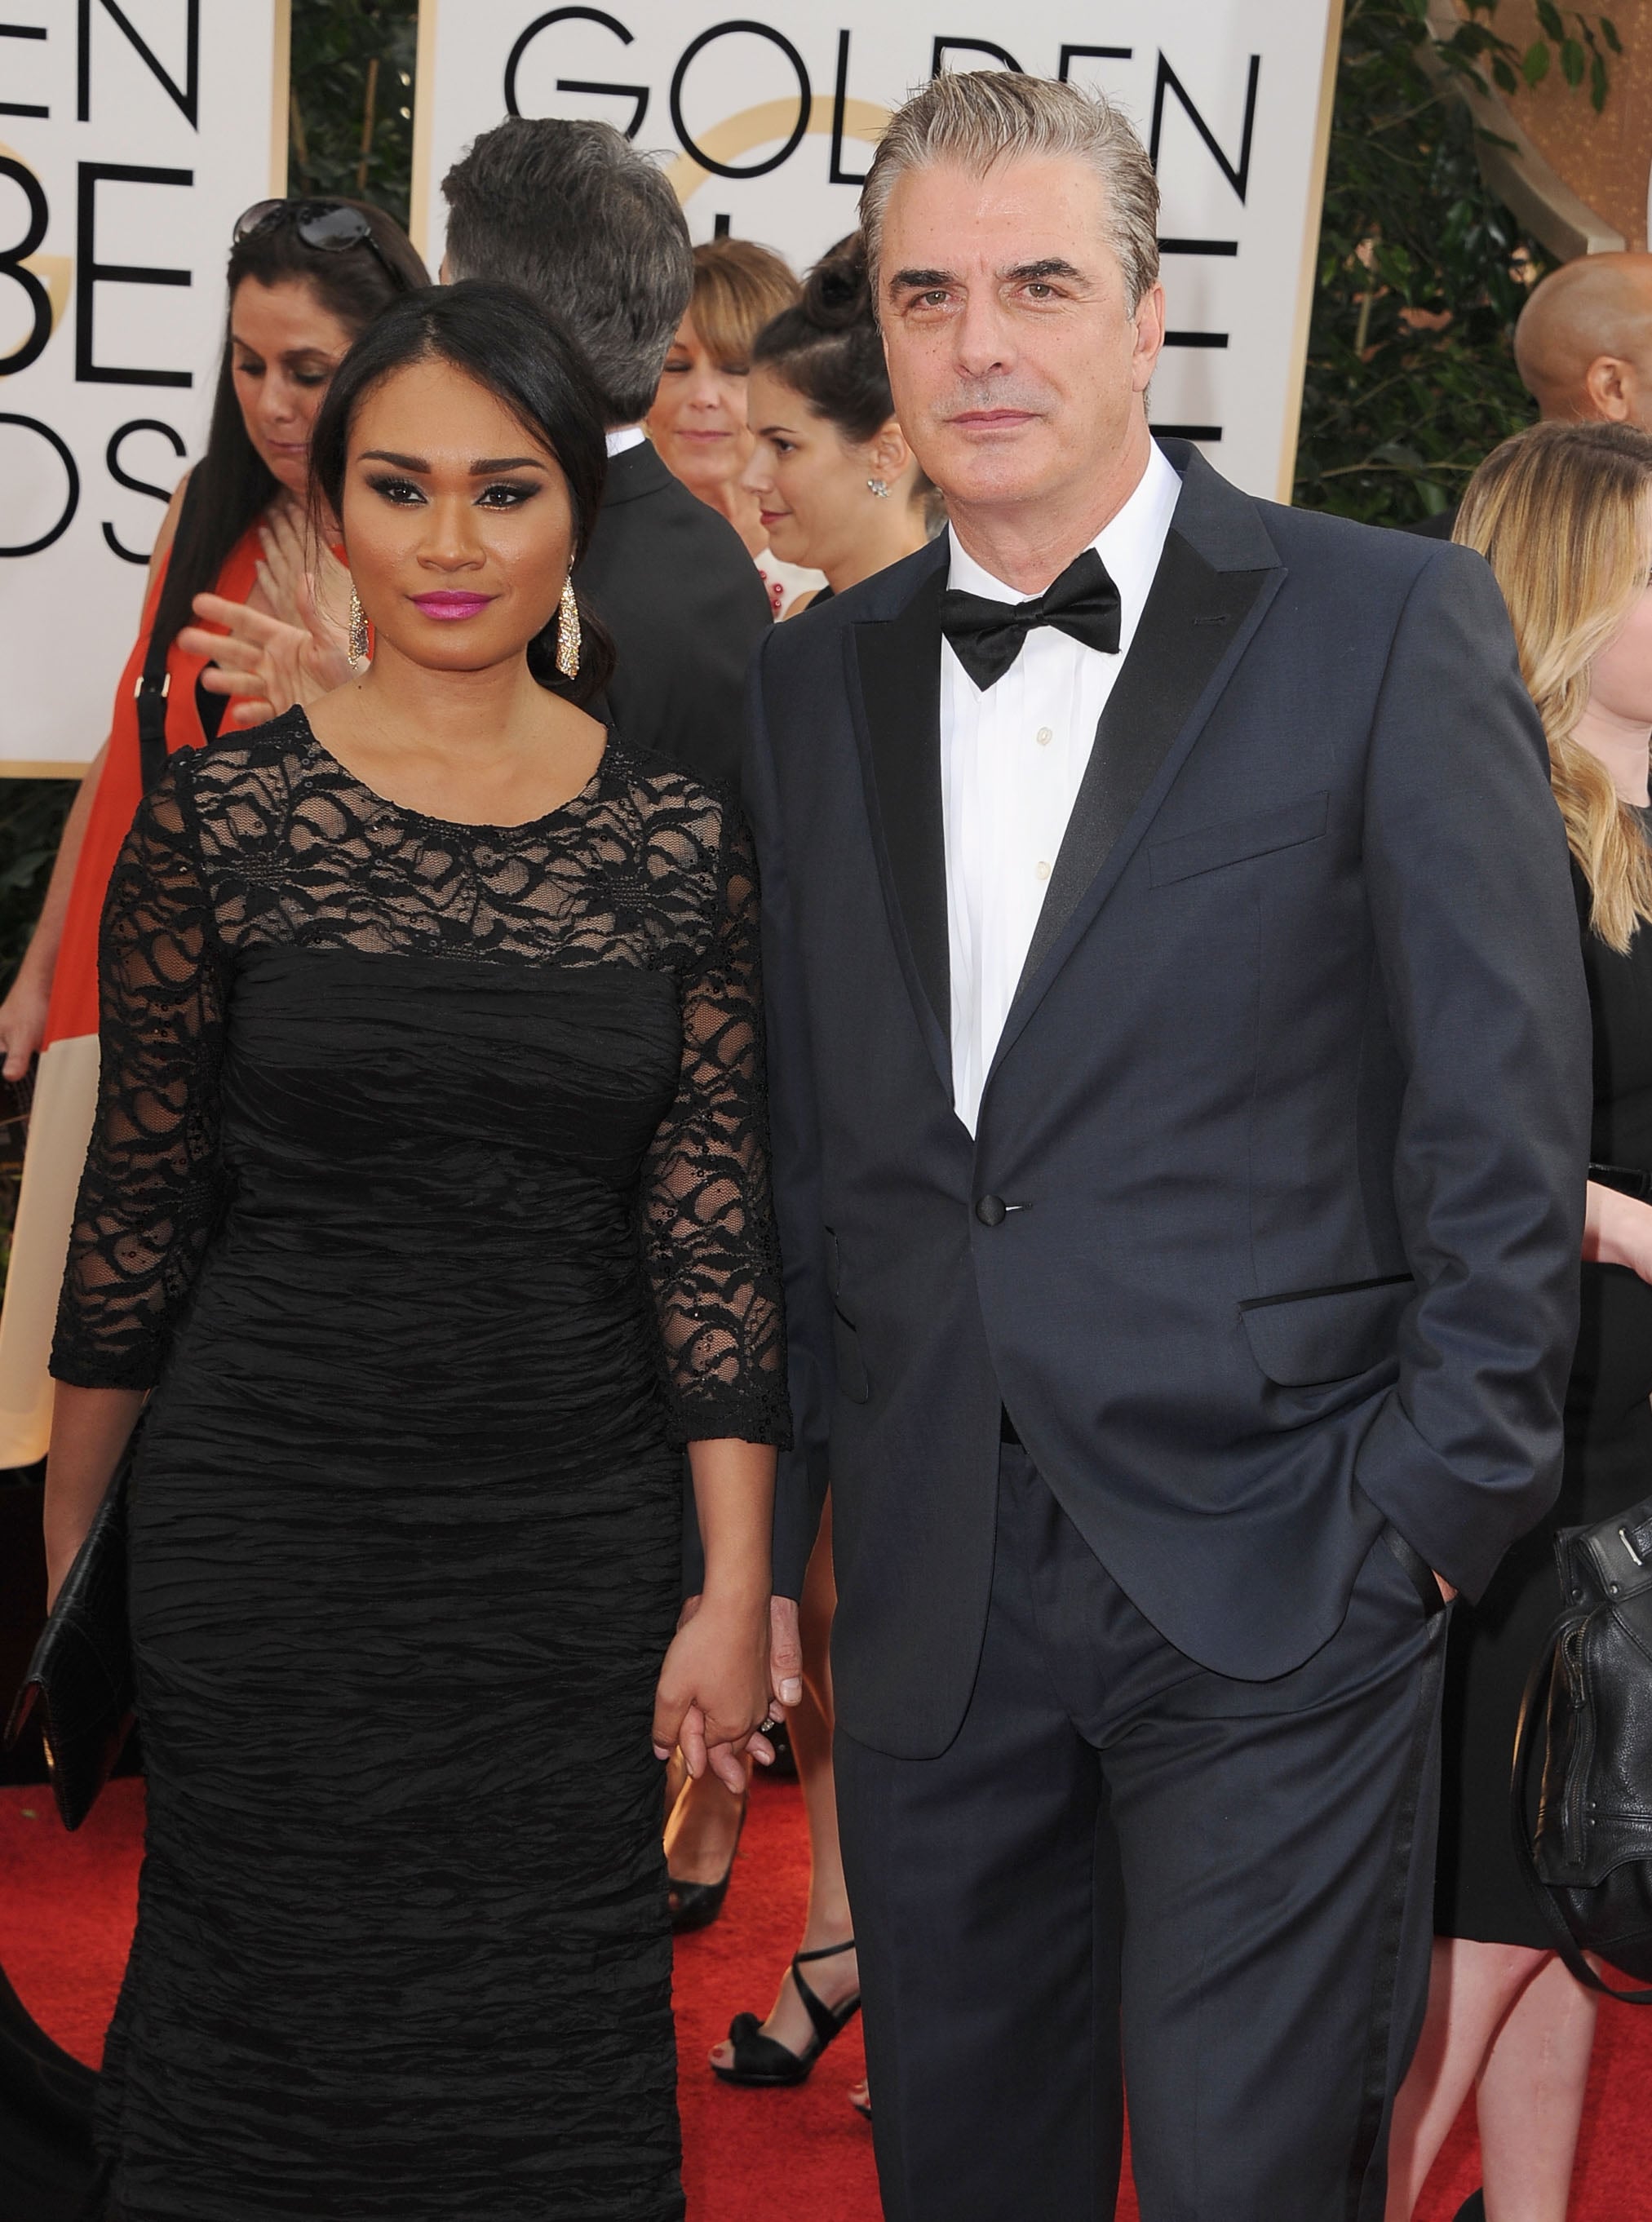 Chris Noth And Tara Wilson Attended The Golden Globes Its Date Night At The Golden Globes